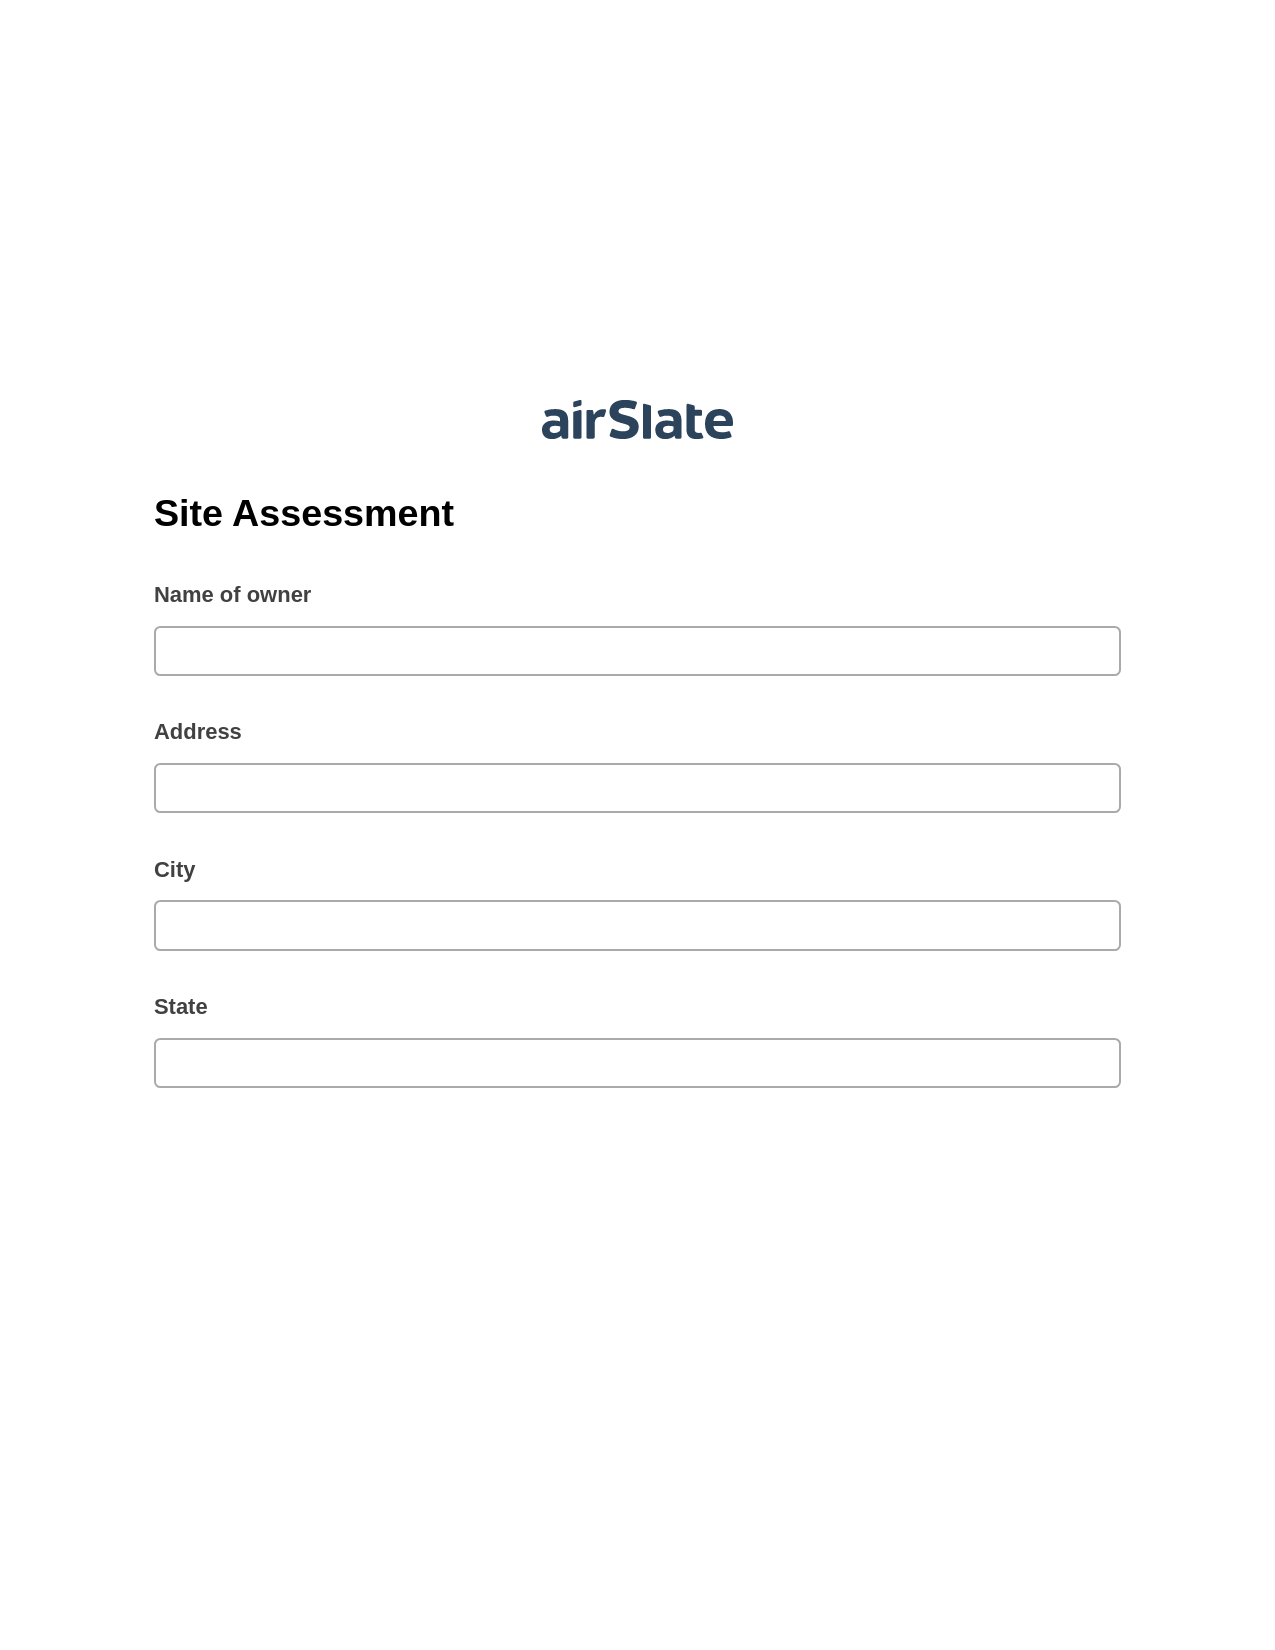 Site Assessment Pre-fill Dropdown from Airtable, Add Tags to Slate Bot, OneDrive Bot